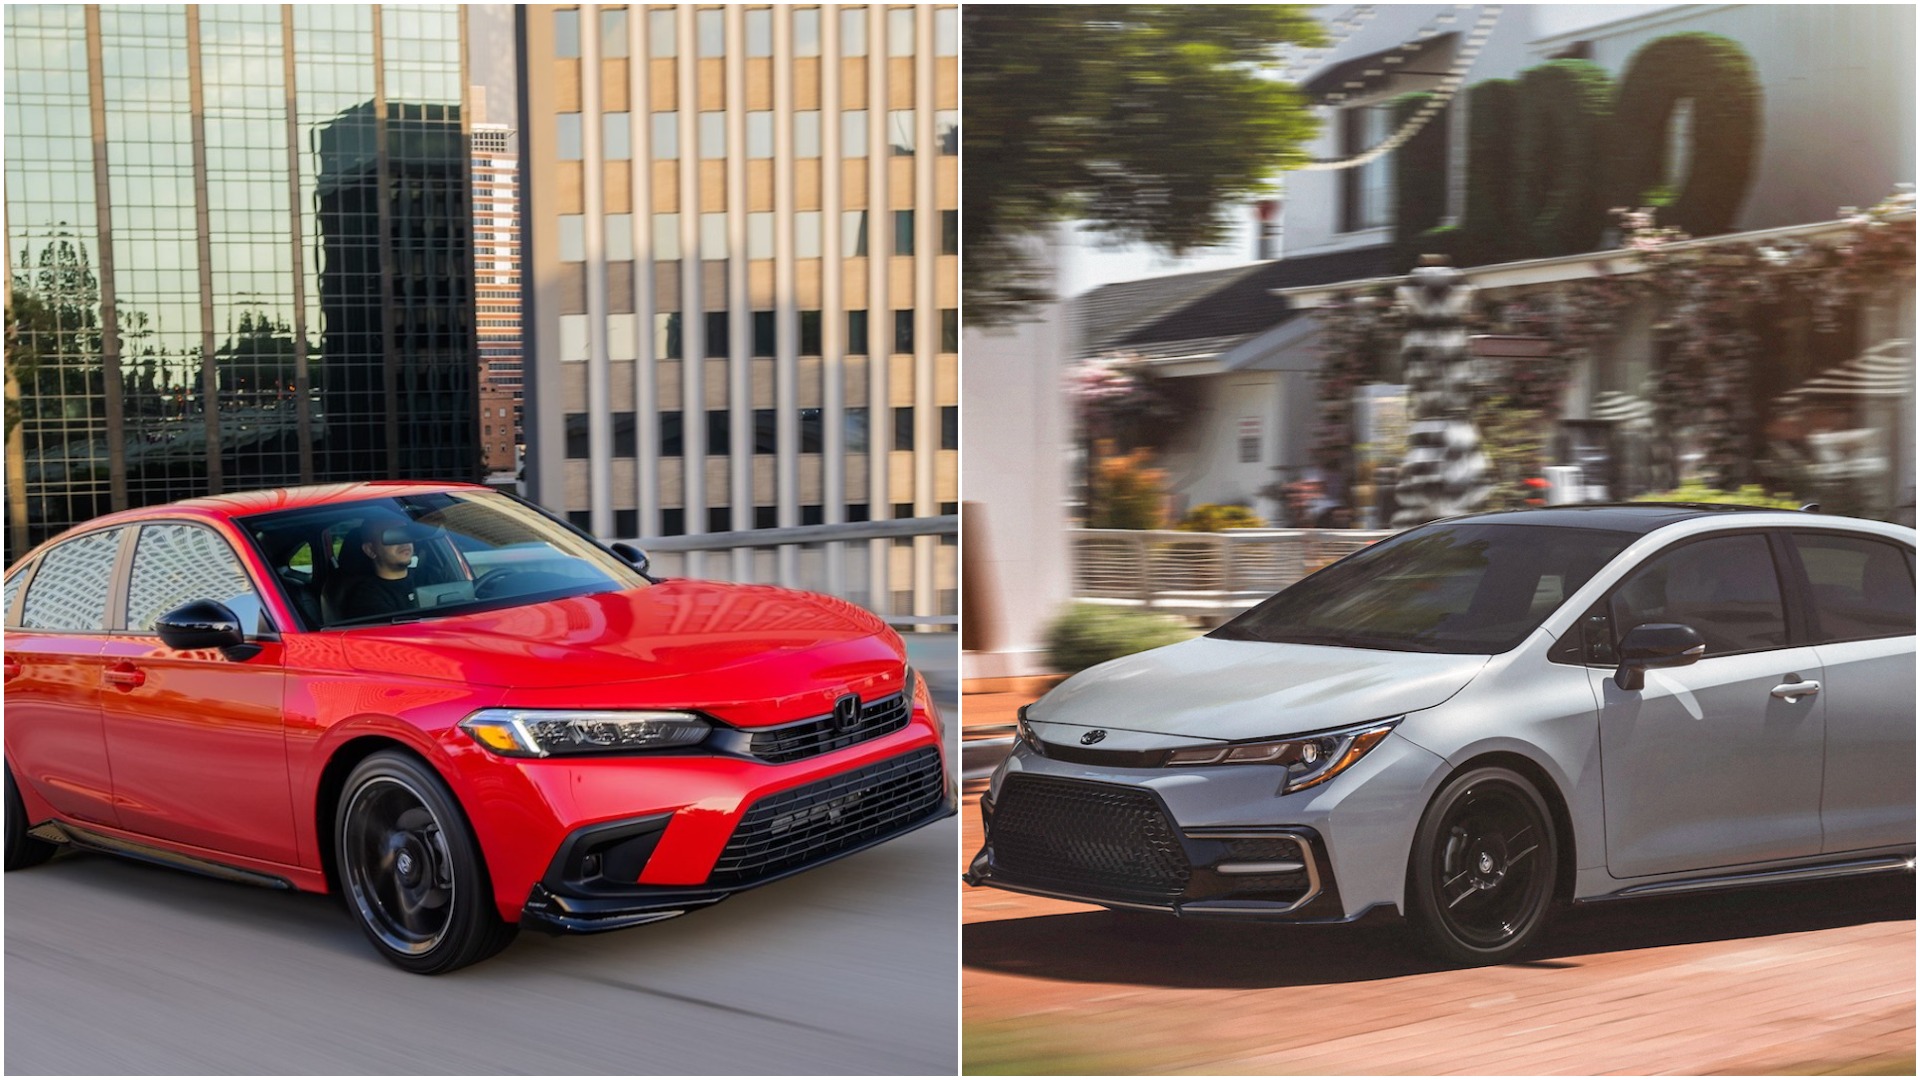 A red 2022 Honda Civic faces a silver 2021 Toyota Corolla in a photo collage